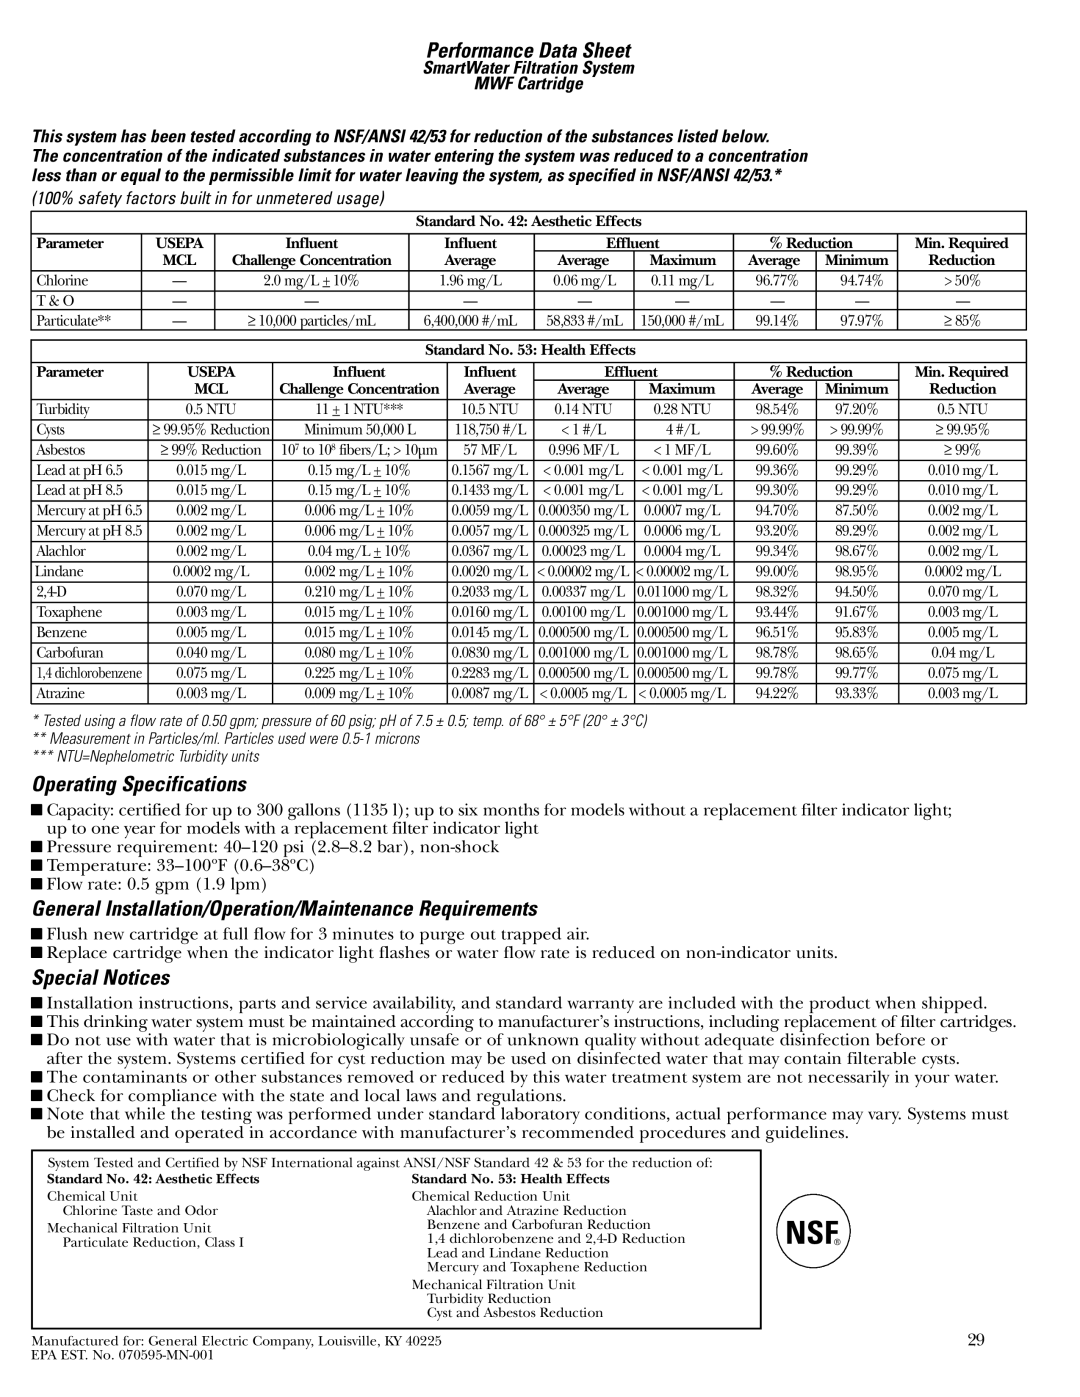 GE Monogram 48 Performance Data Sheet, Operating Specifications, General Installation/Operation/Maintenance Requirements 